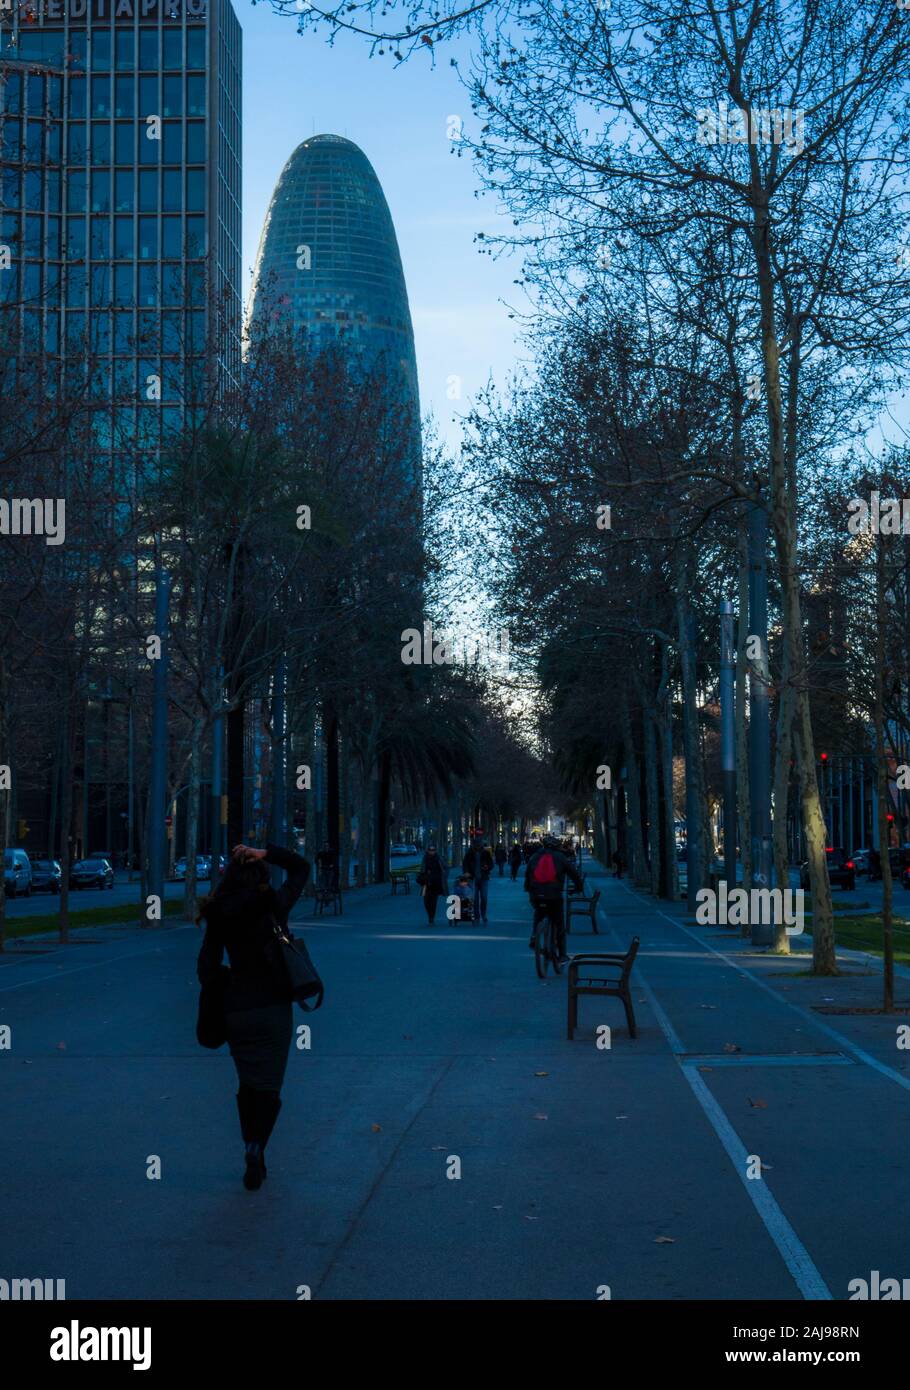 Pedestrian walkway on Avinguda Diagonal with office building and Torre Glories (formerly known as Torre Agbar) towering above, Barcelona, Spain Stock Photo